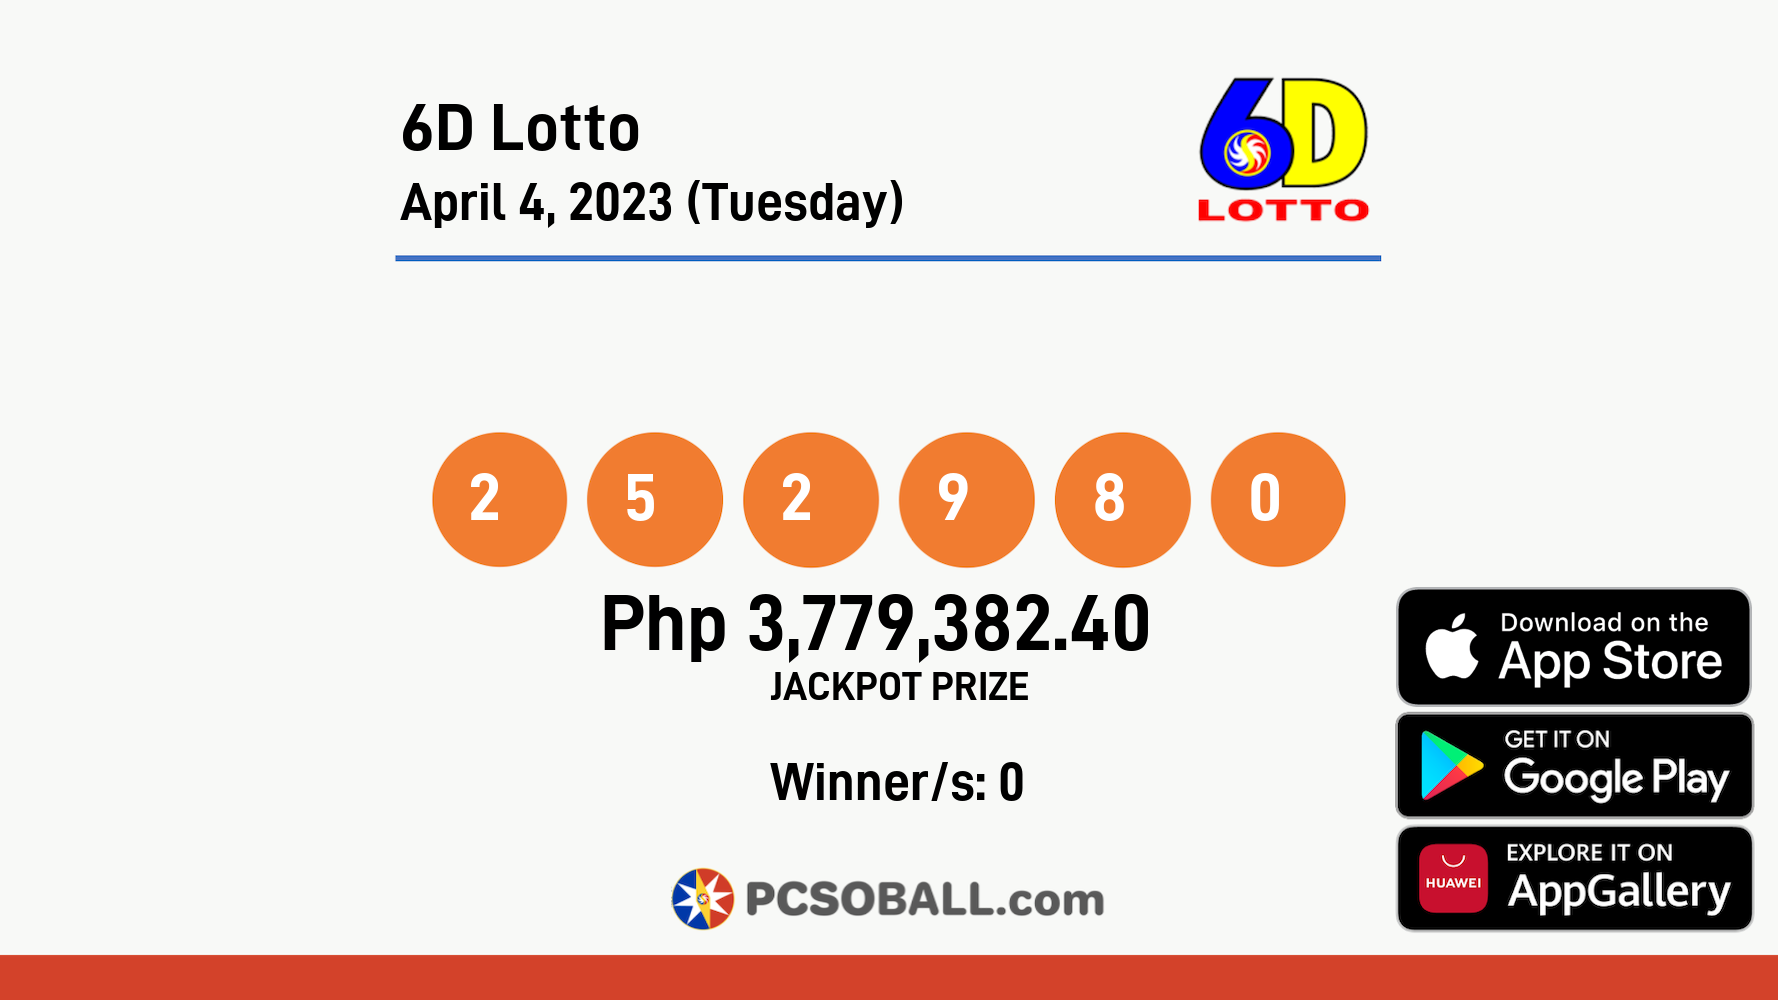 6D Lotto April 4, 2023 (Tuesday) Result